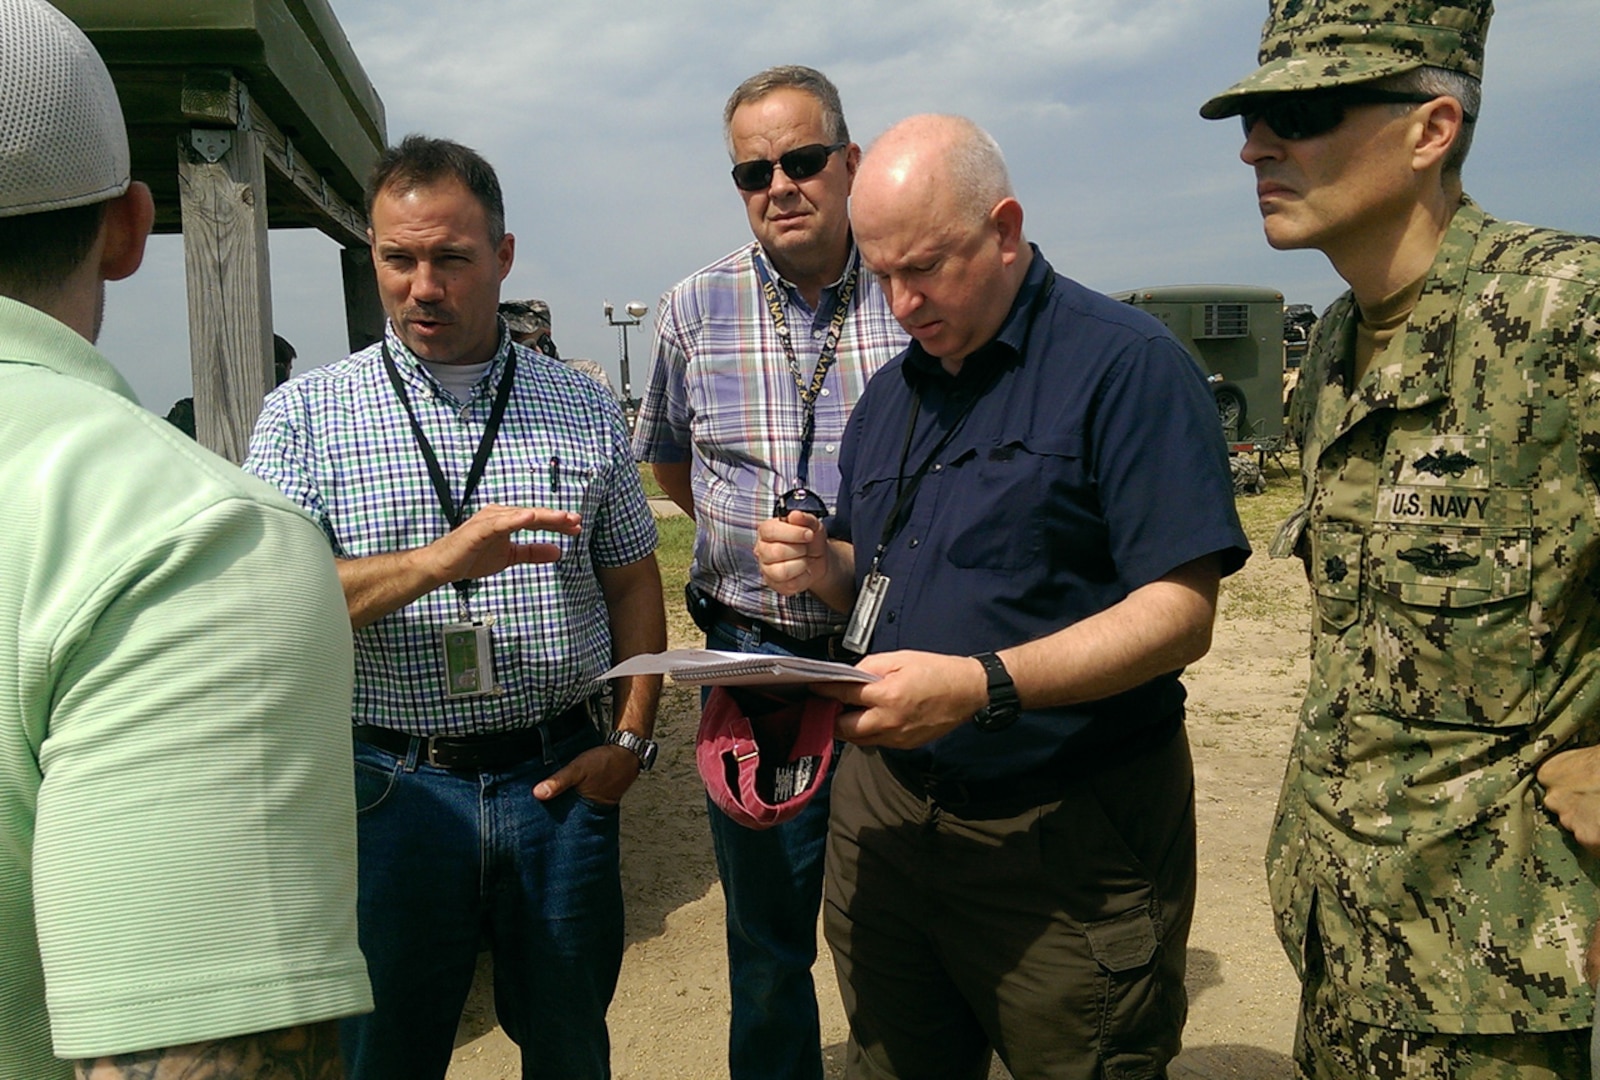 Defense Logistics Agency logistics distribution team members including John Heikenin, Chuck Ensinger, Craig Hill and Navy Cmdr. Greg Eaton, discuss transportation requirements with a local logistics company during U.S. Transportation Command's Turbo Distribution 15-7 exercise at Joint Base McGuire-Dix-Lakehurst, N.J., July 22, 2015. Transcom conducts the annual exercise to assess Joint Task Force-Port Opening aerial port and distribution operations. The scenario is focused on humanitarian and disaster relief operations in a third world country. This is the first time a Defense Logistics Agency support team participated and the team deployed with the first wave of JTF-PO forces.